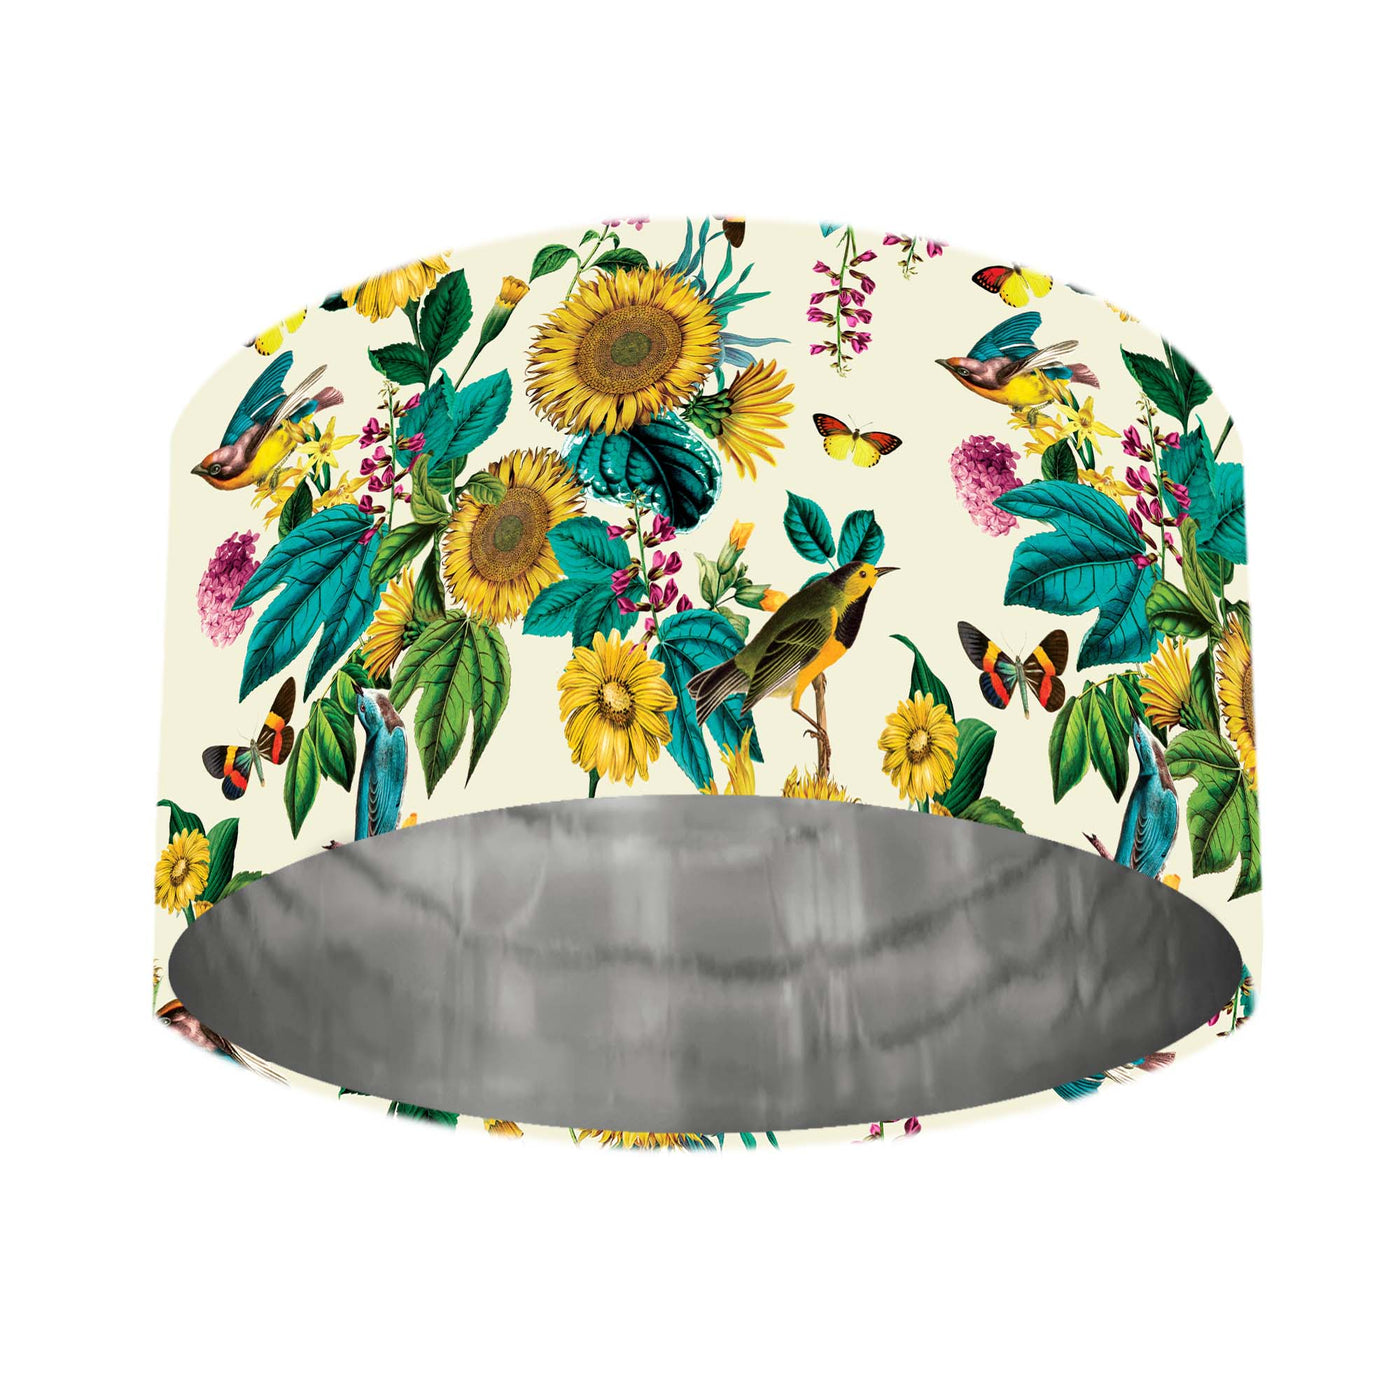 Silver Lined Lampshade with Birds and Sunflowers in Cream